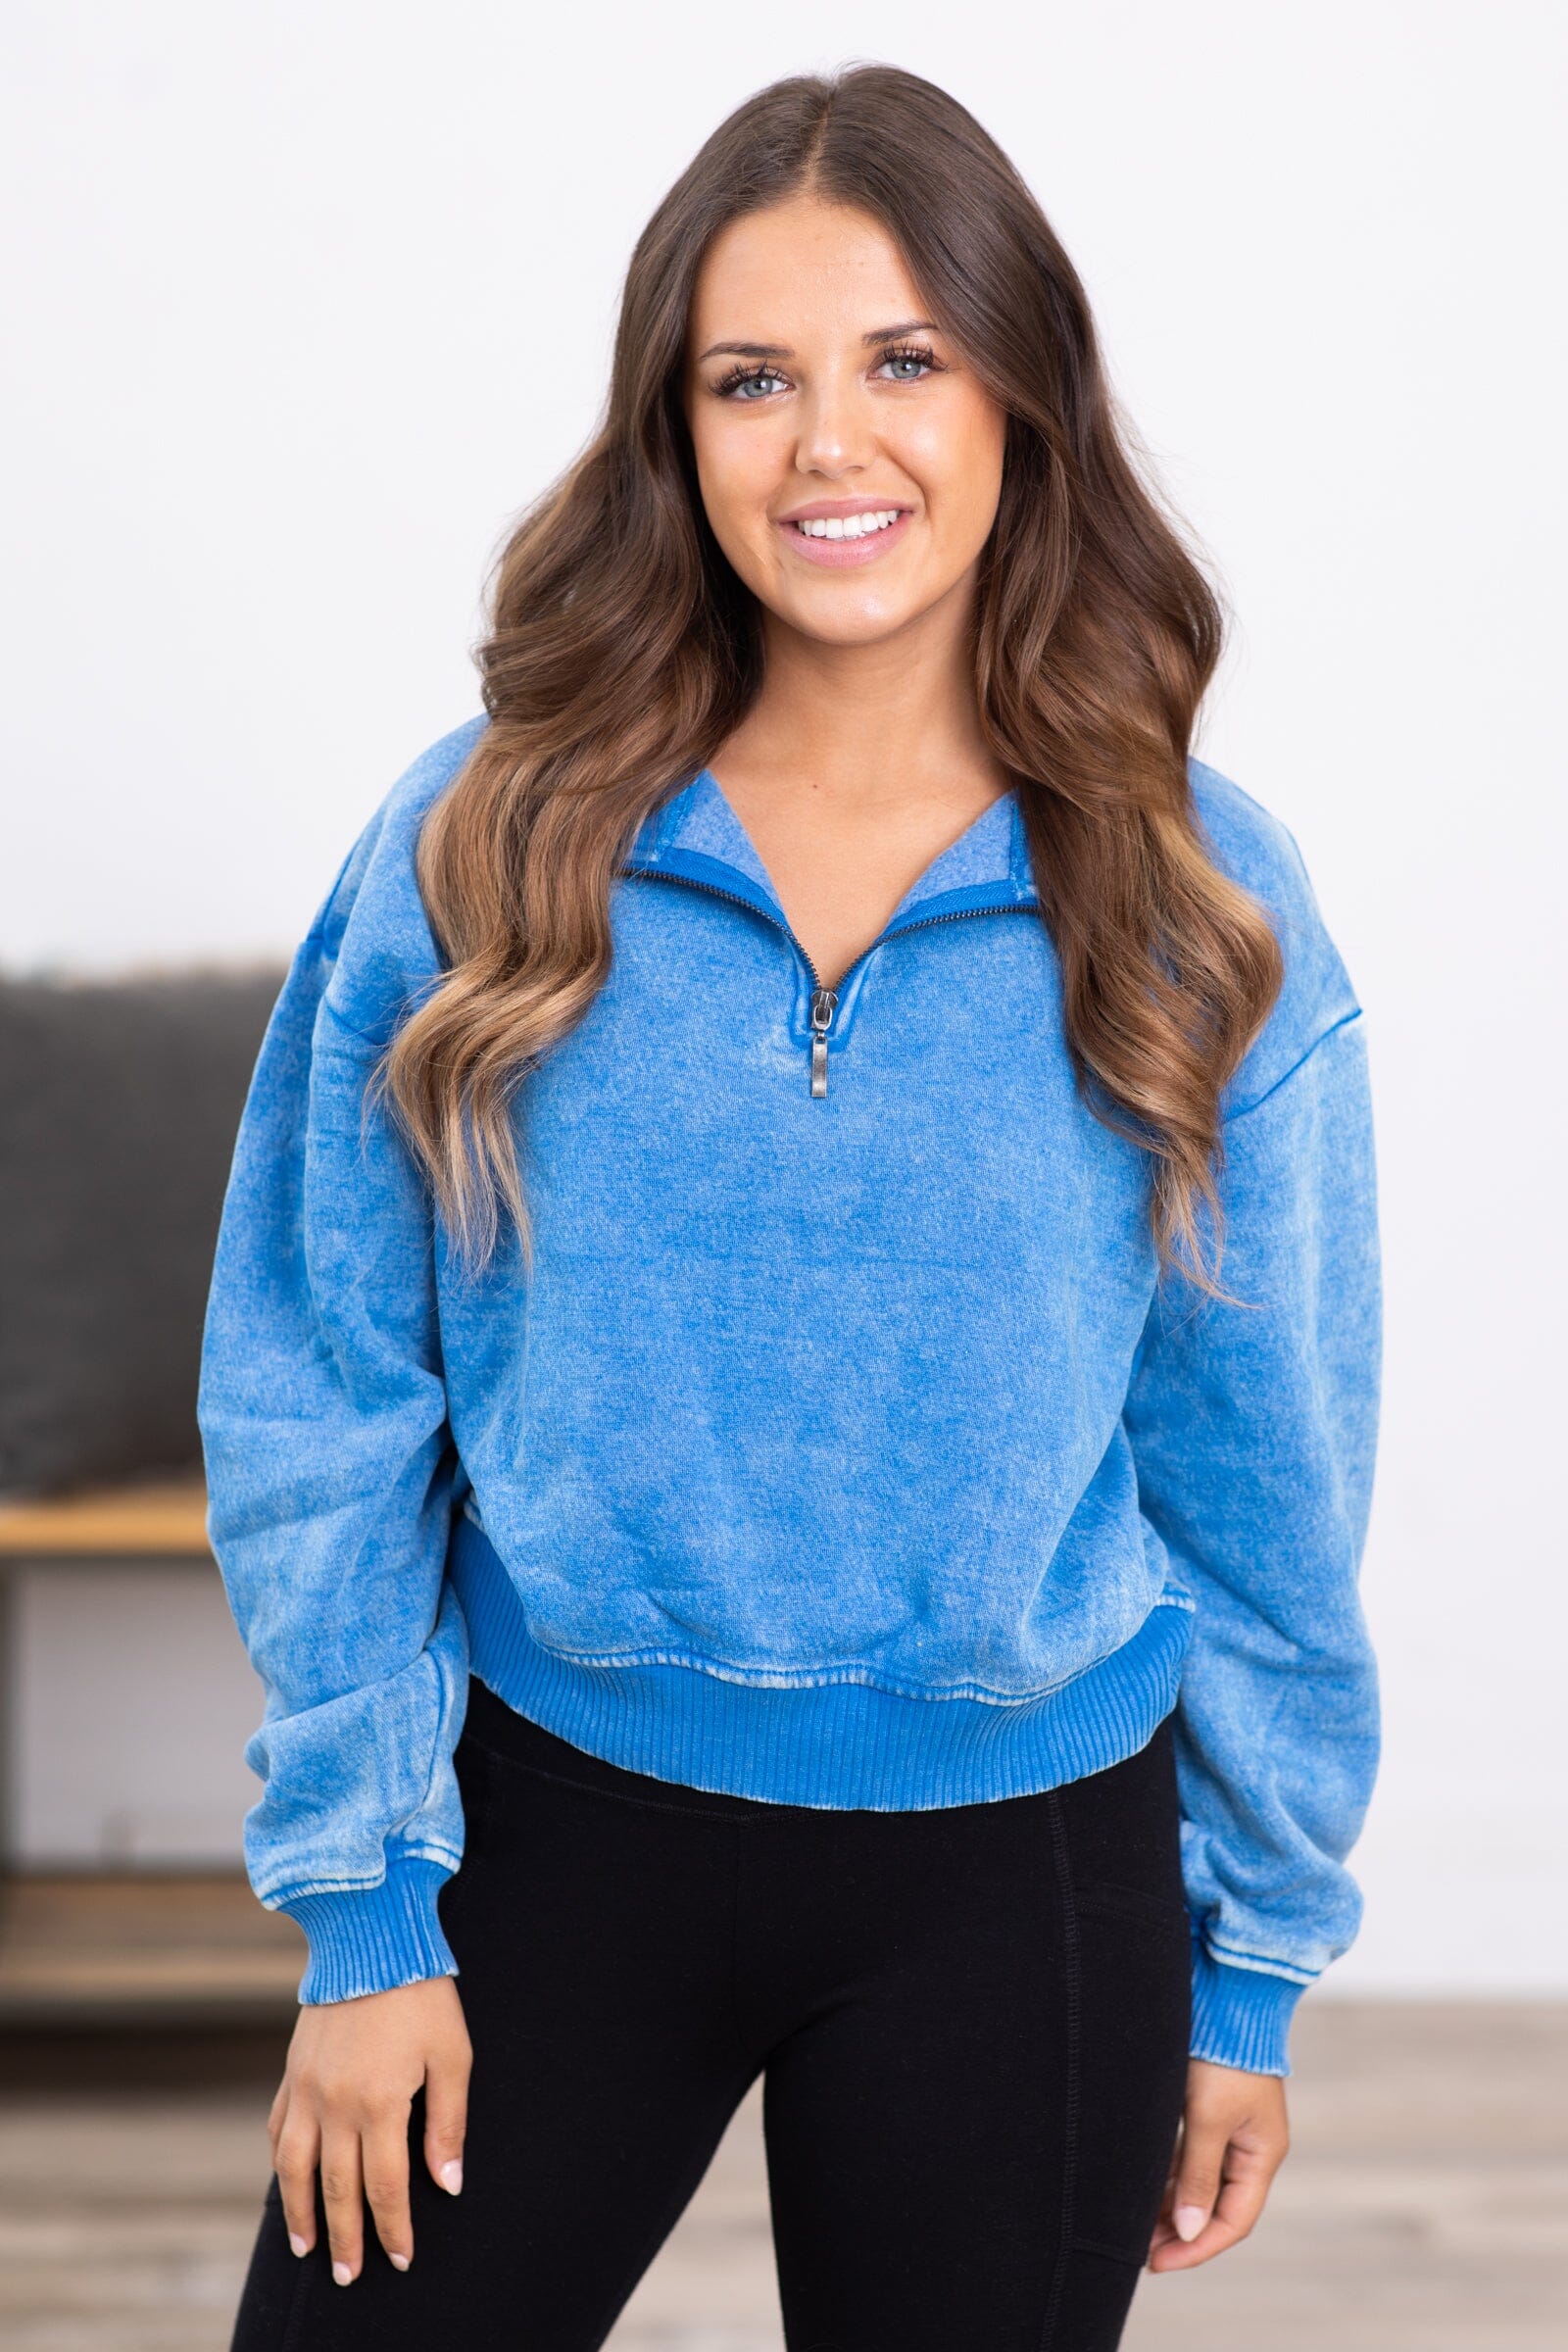 Bright Blue Acid Wash Fleece 1/4 Zip Pullover - Filly Flair